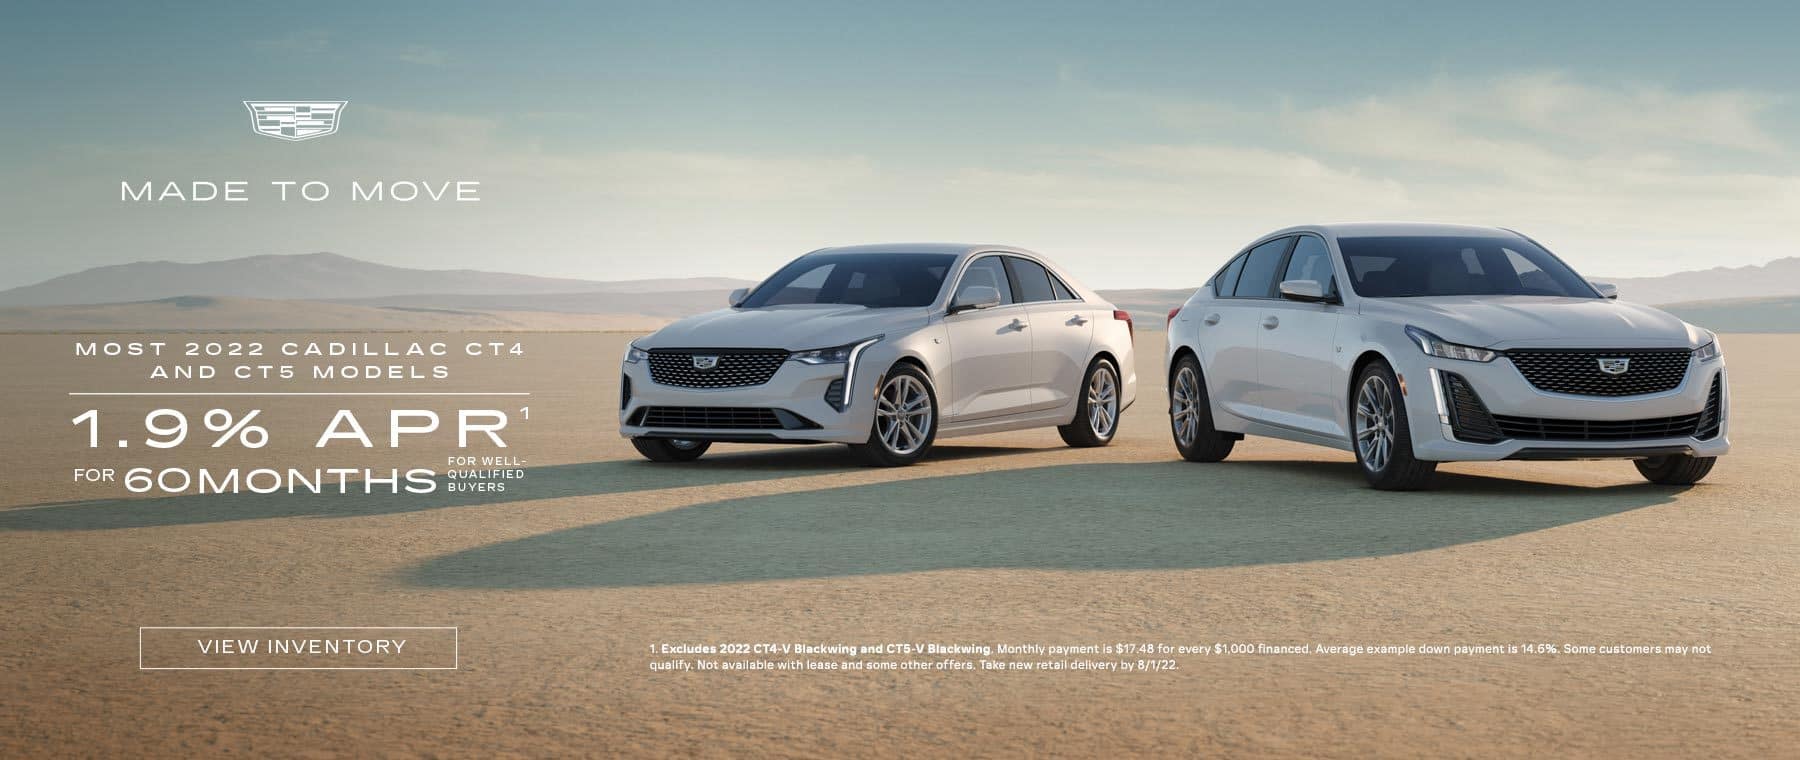 2022 Cadillac CT4 and CT5. 1.9% for 60 months for well-qualified buyers.